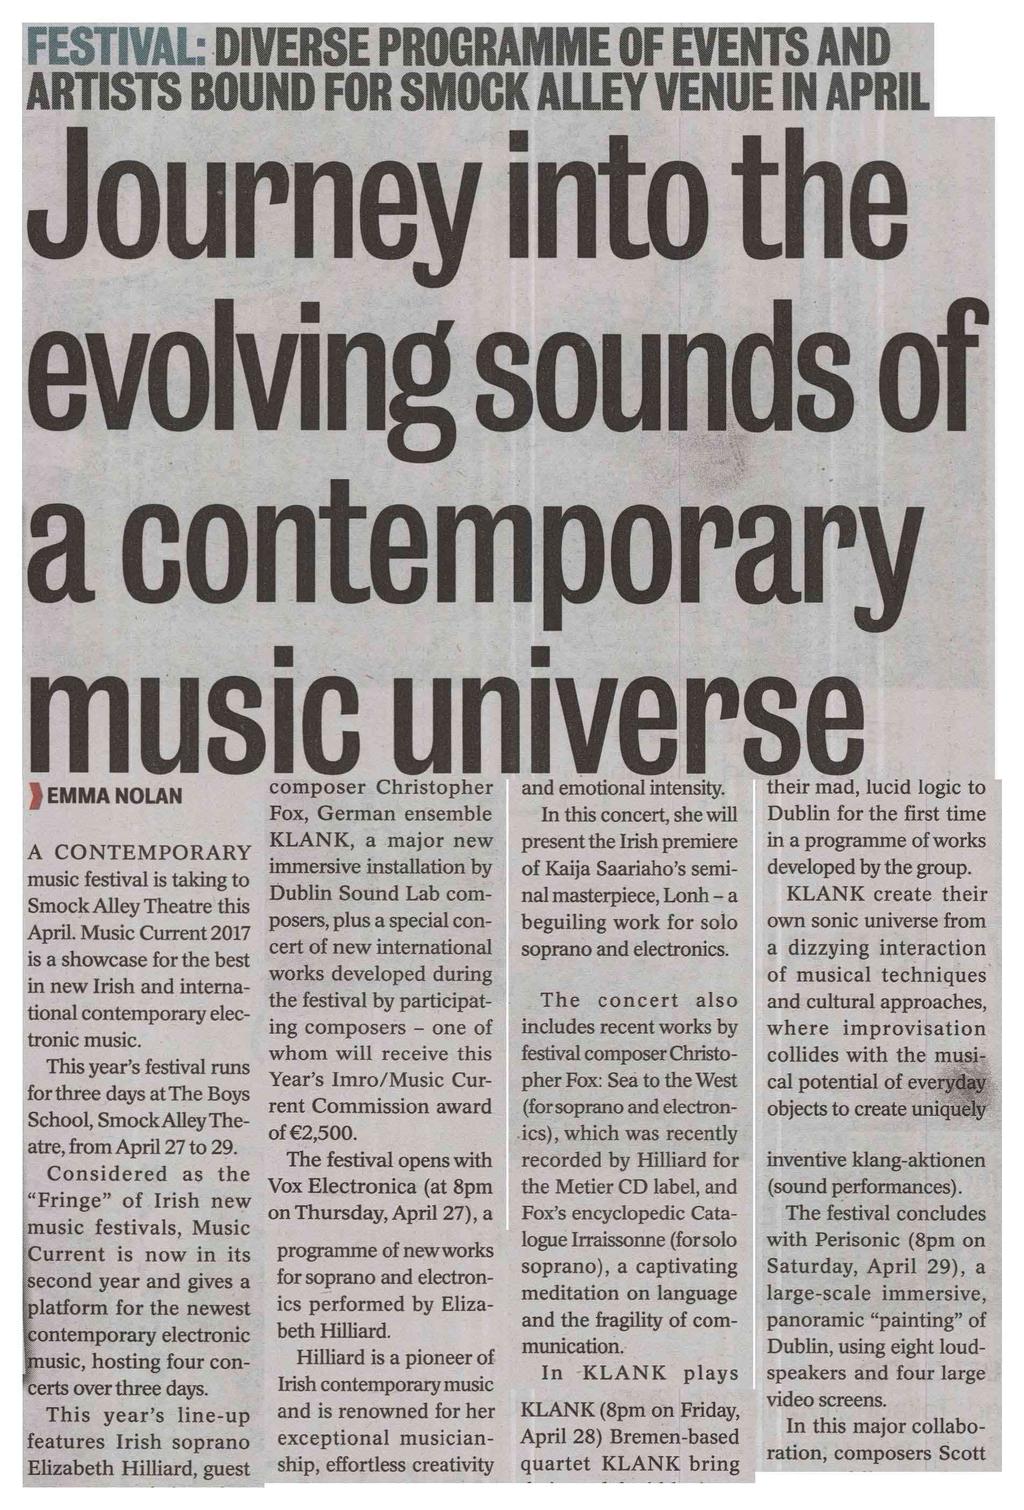 Blanch Gazette* -18- Area of Clip: 81700mm² Page 1 of 3 FESTIVAL: DIVERSE PROGRAMME OF EVENTS AND ARTISTS BOUND FOR SMOCK ALLEY VENUE IN APRIL Journey into the evolving sounds of a contemporary music